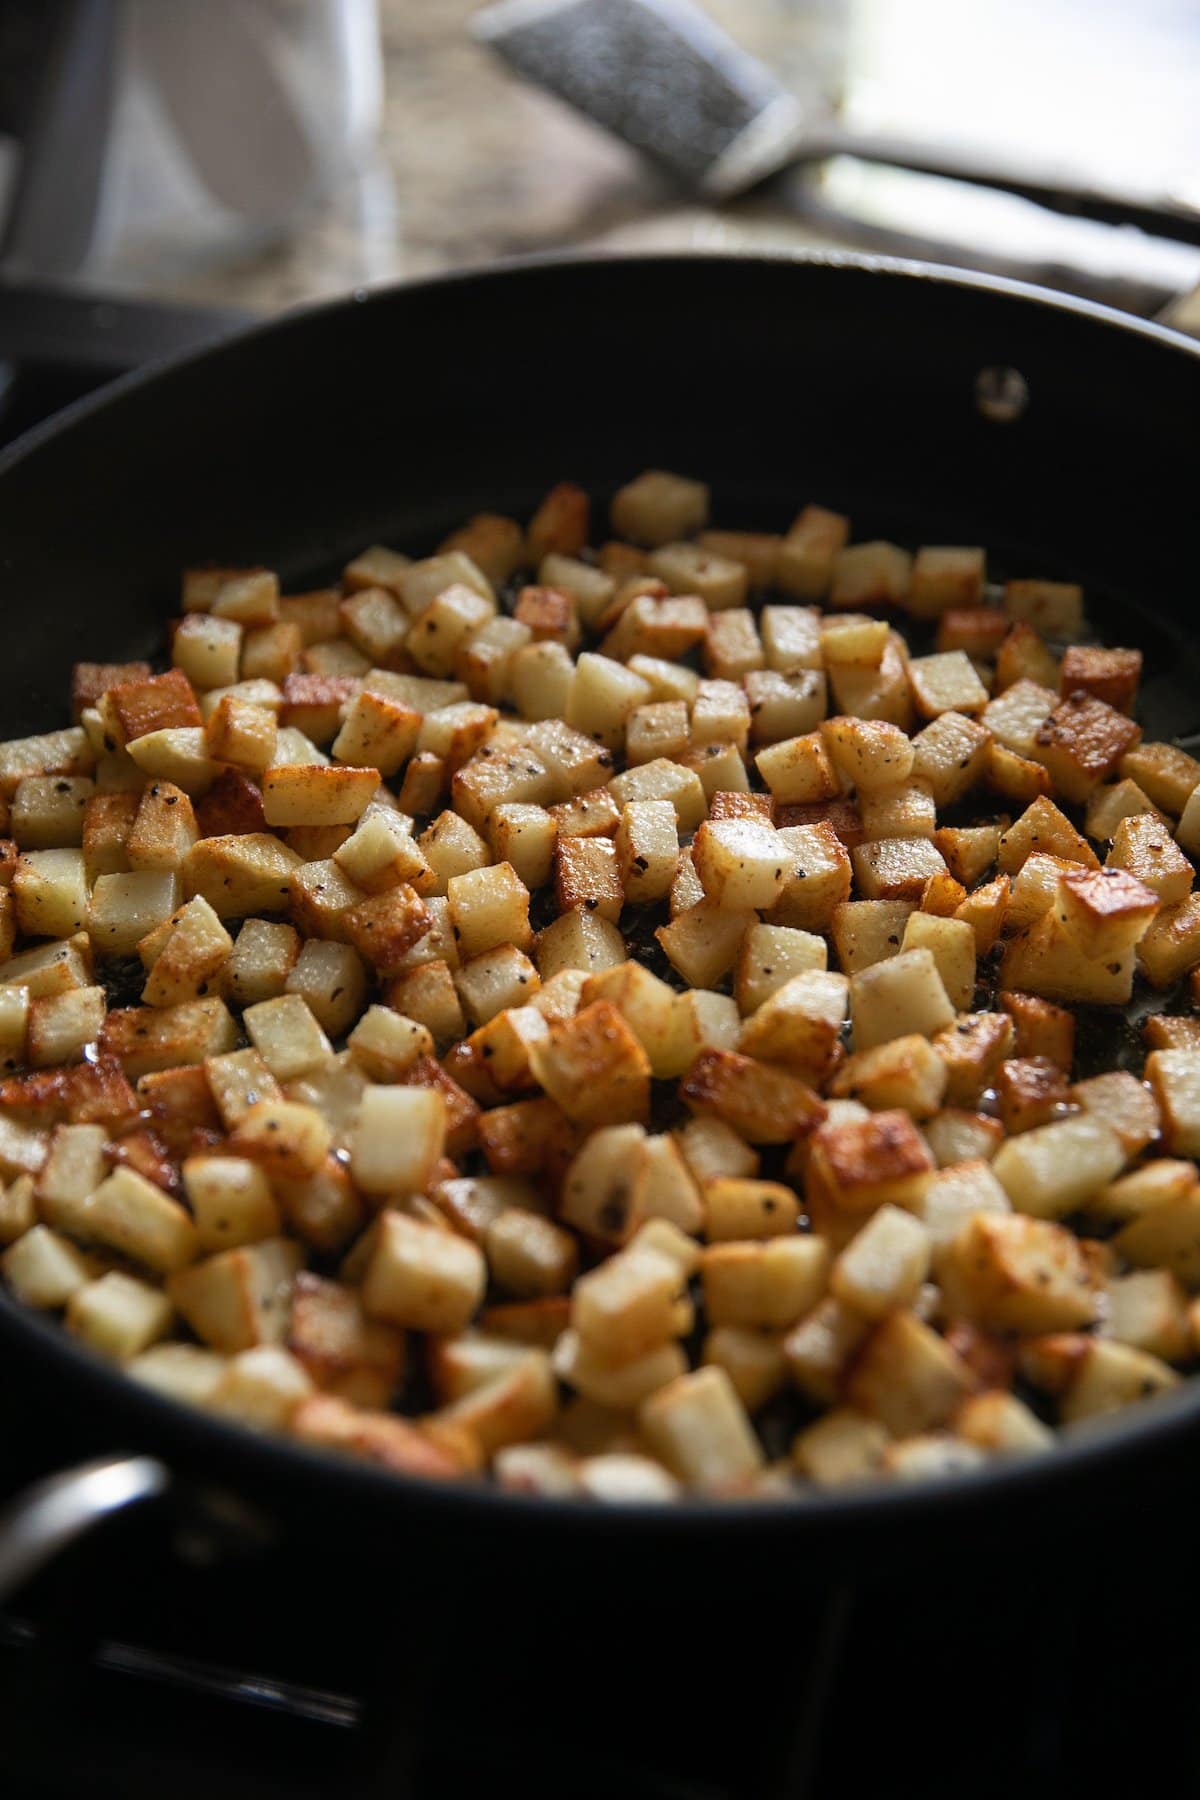 diced potatoes being fried in a pan